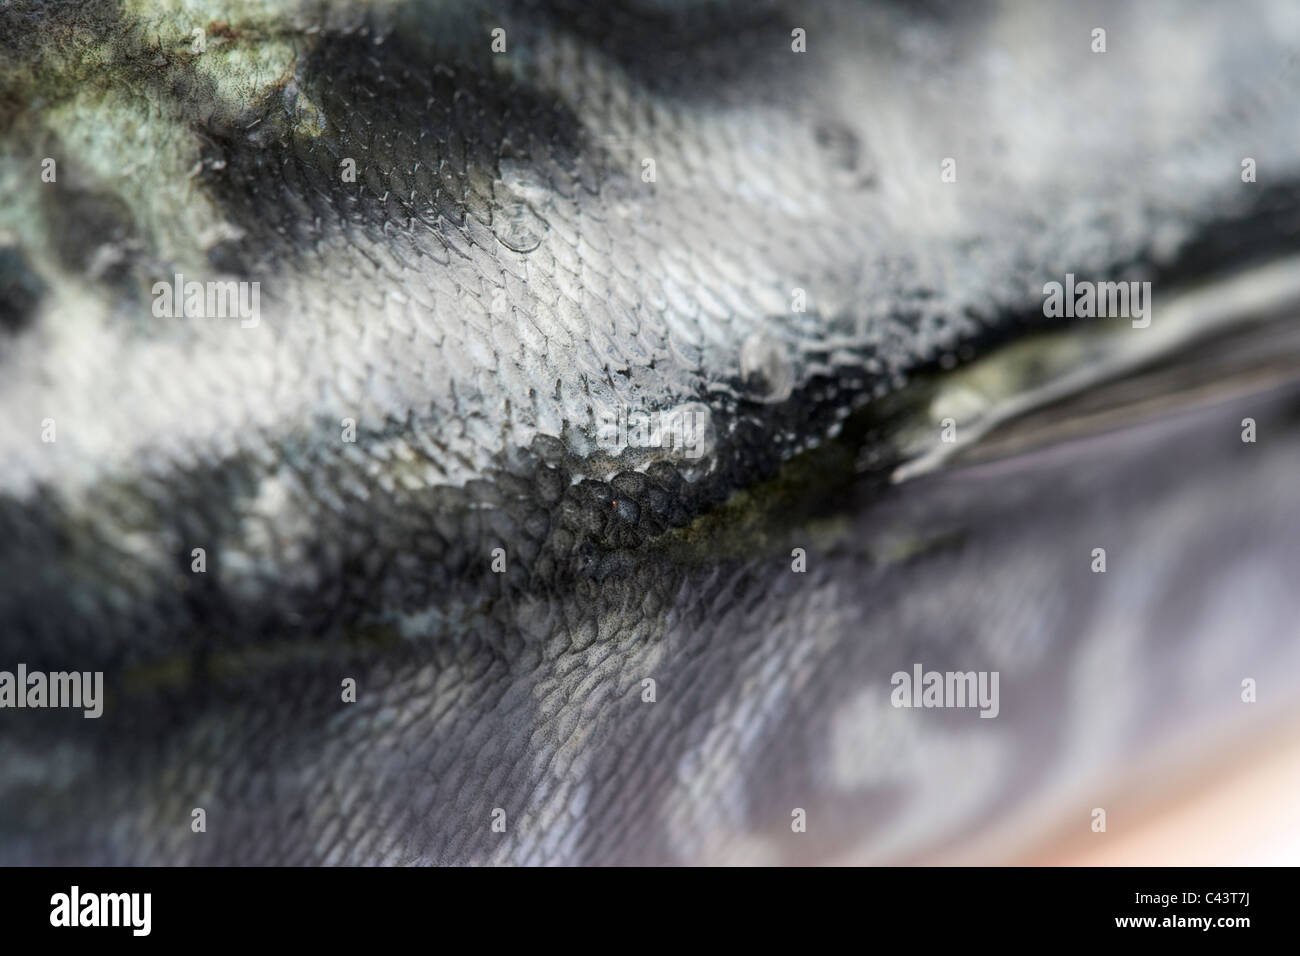 back top scales on freshly caught mackerel fish on a plastic cutting board Stock Photo